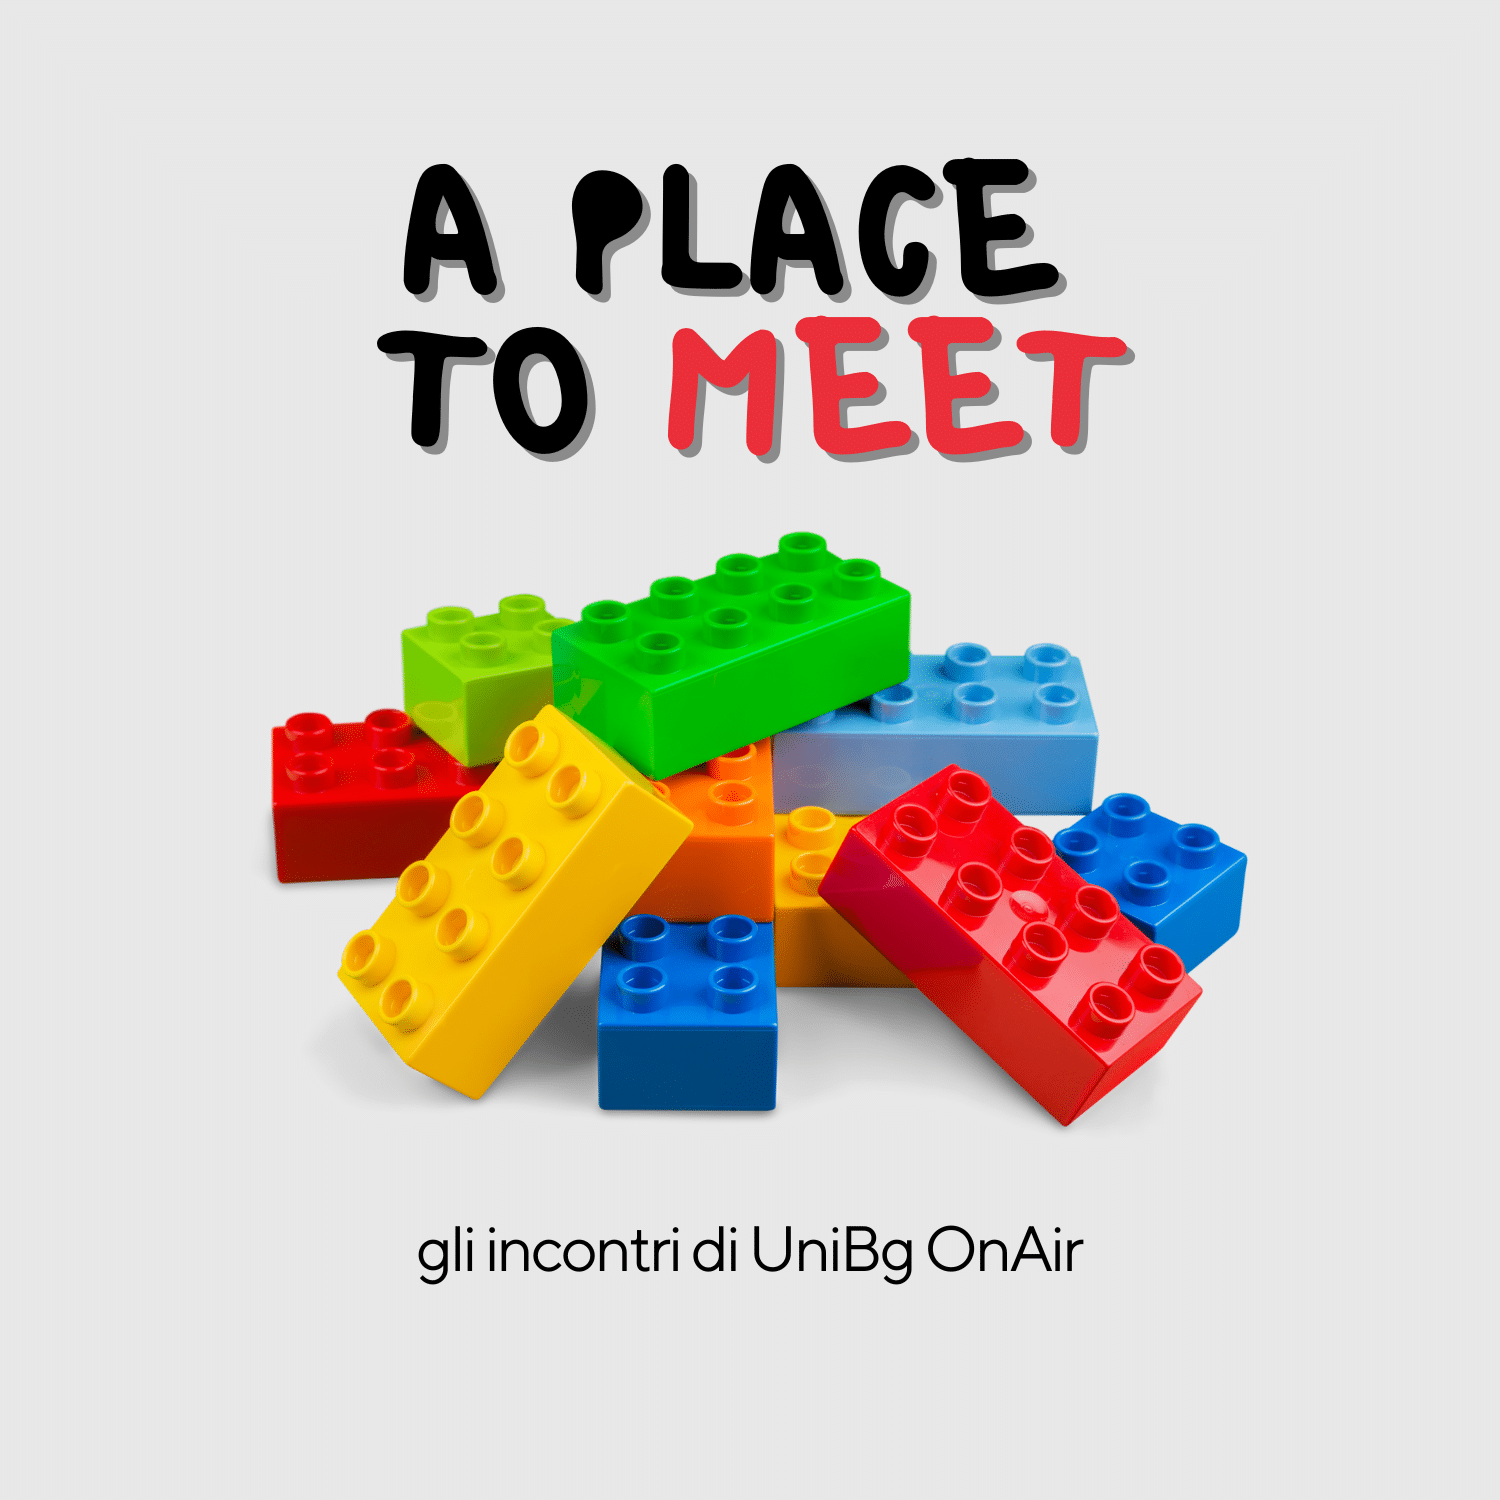 A place to meet